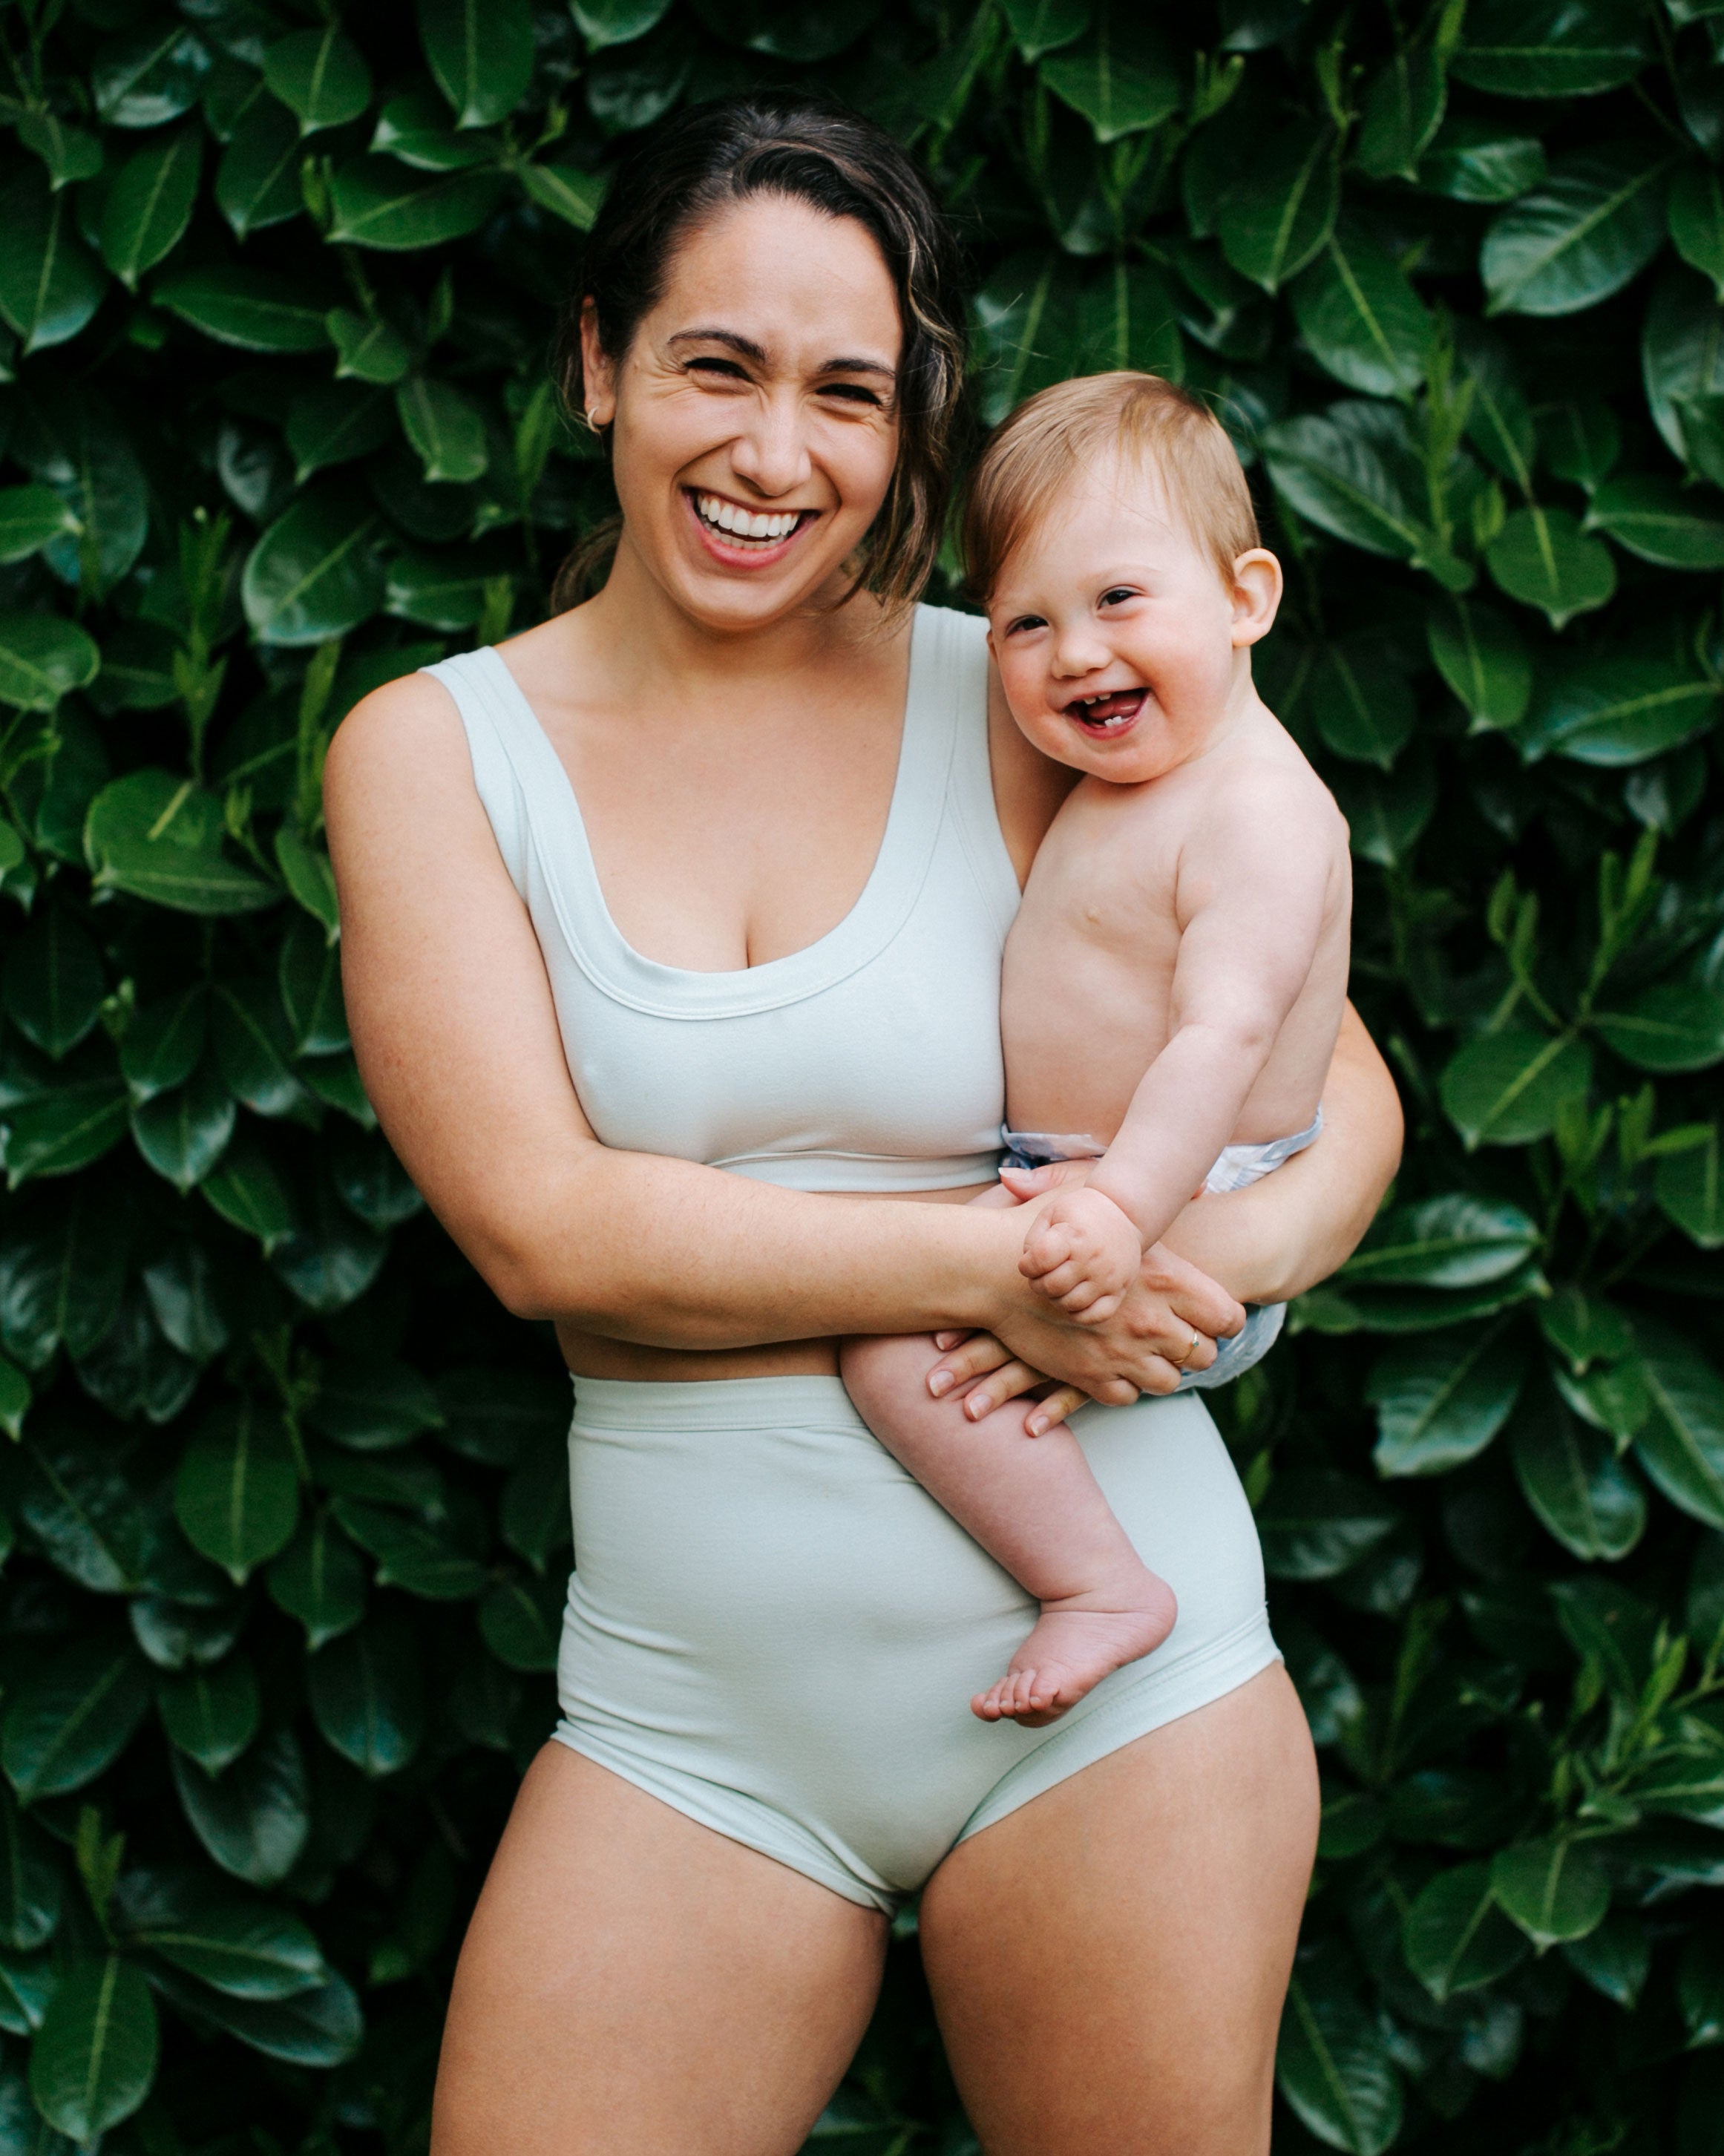 Model laughing while holding her smiling baby in front of green leaves wearing a set of Dried Sage Bralette and Sky Rise style underwear.